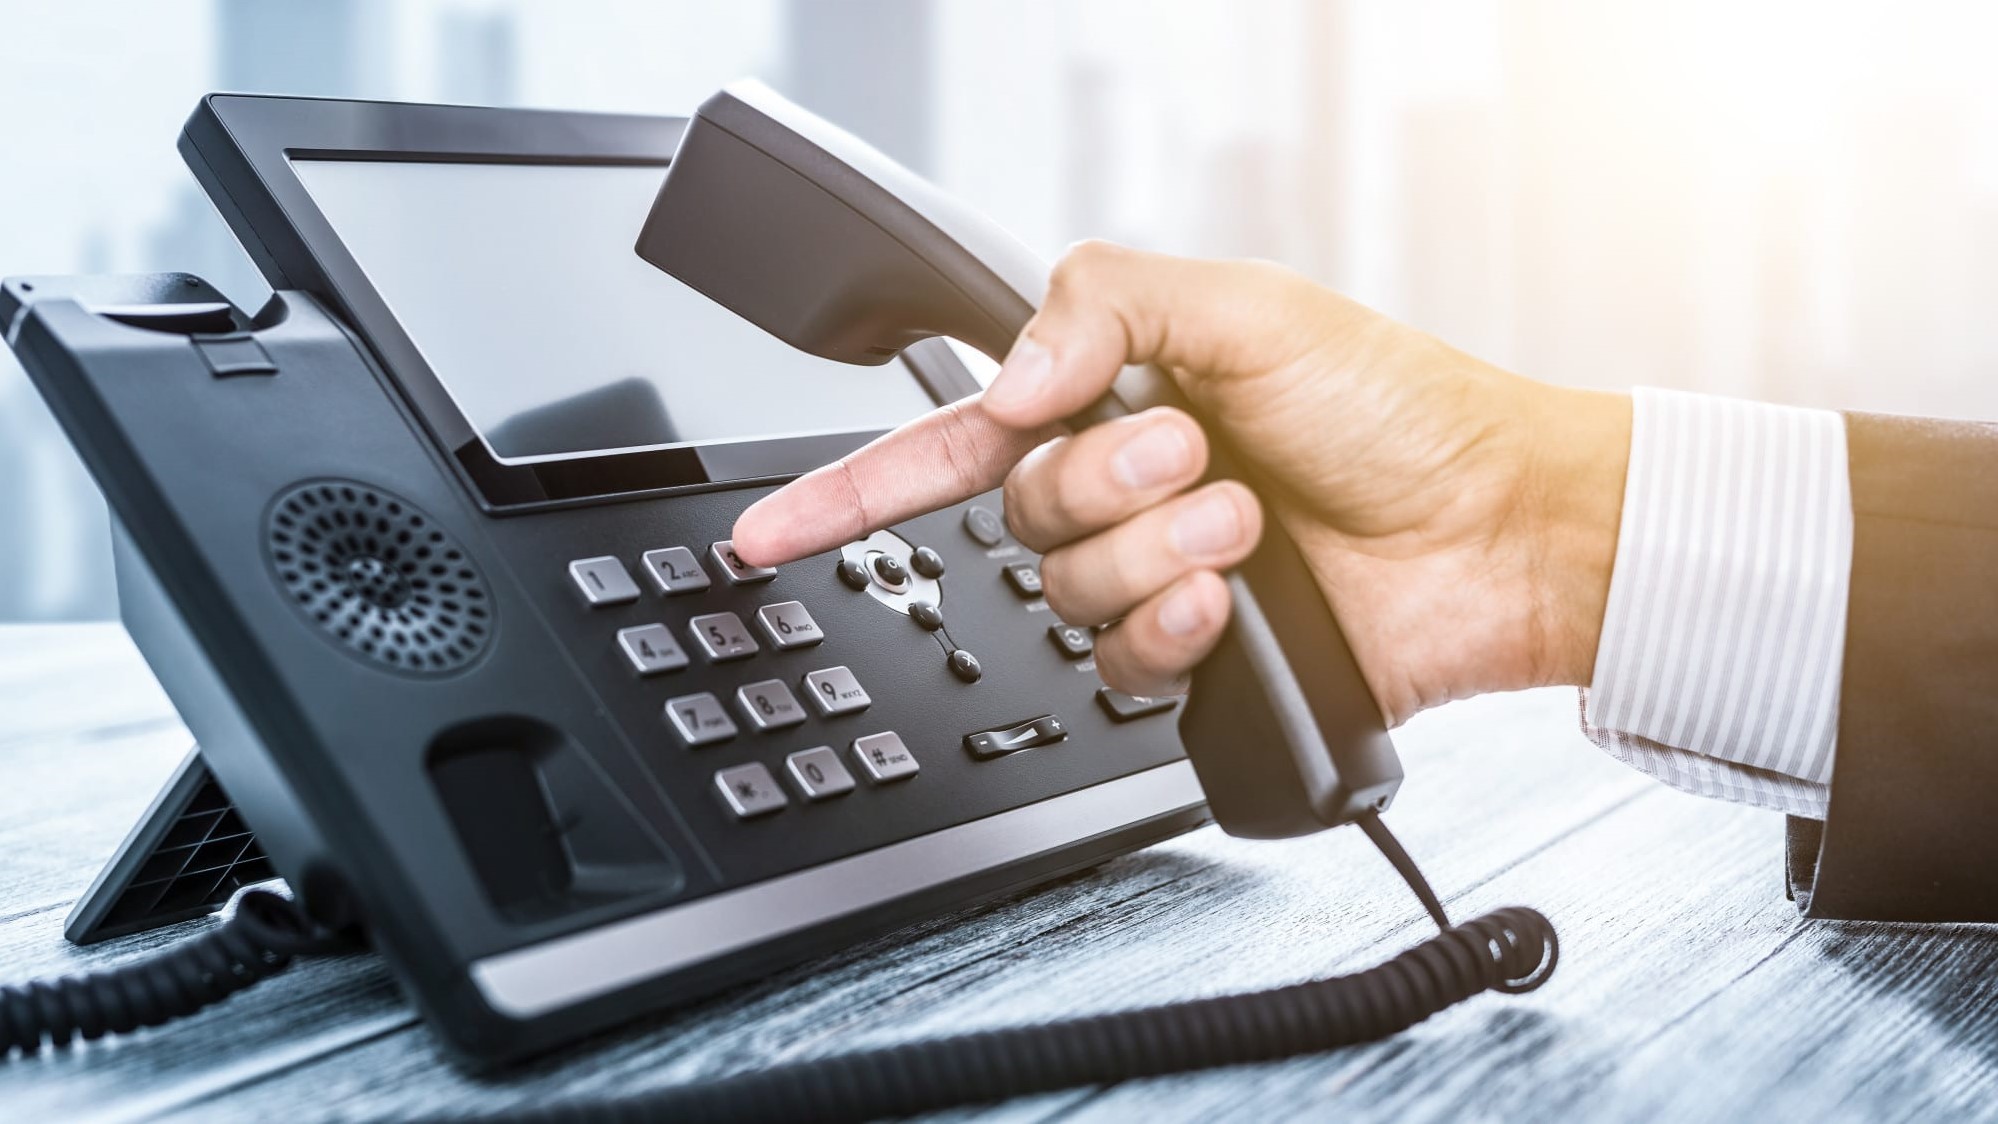 Why should small businesses choose a VoIP phone system?